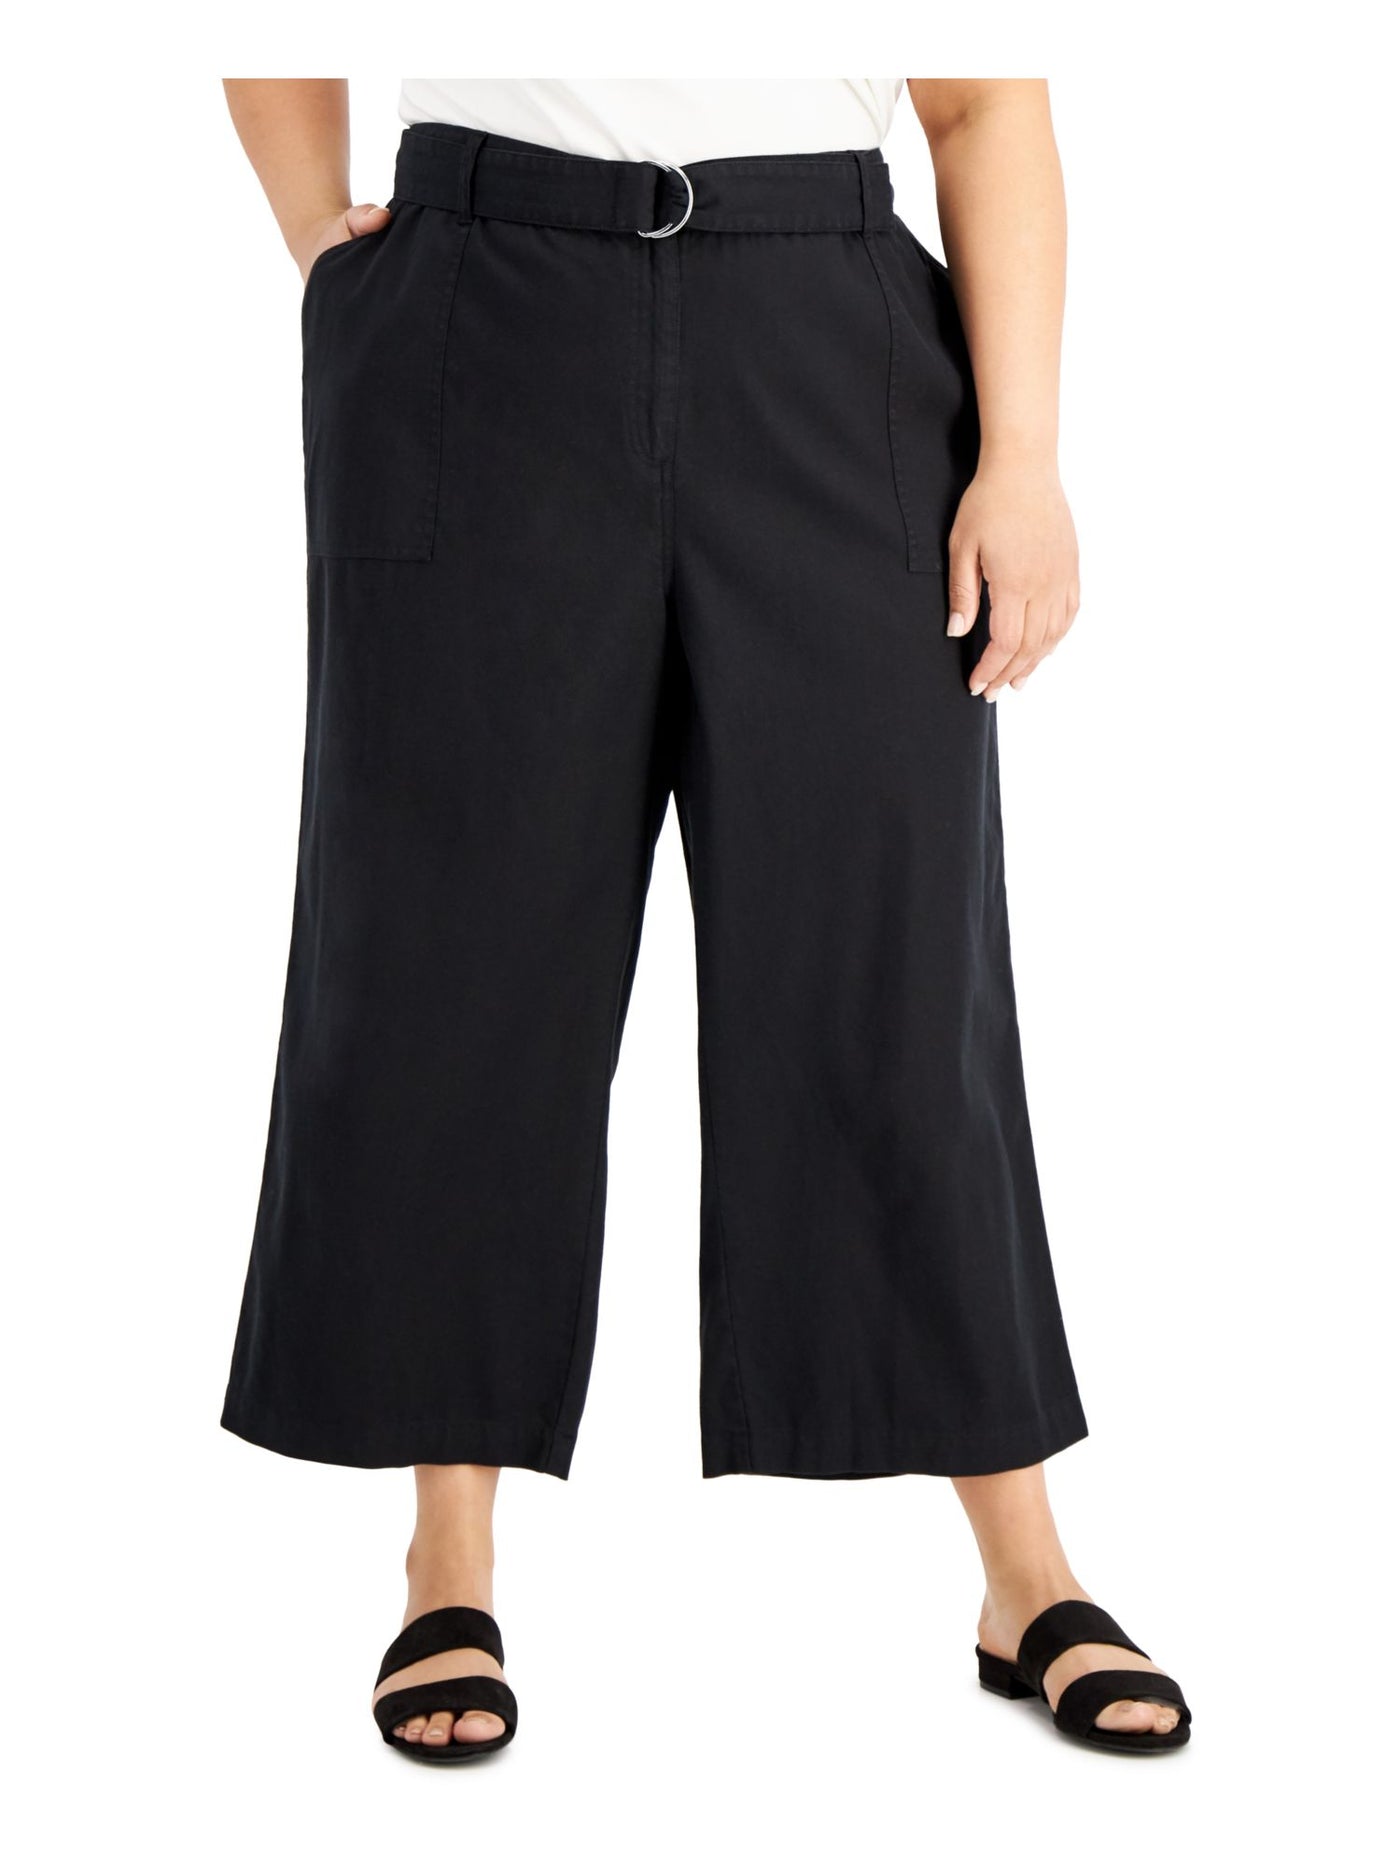 CALVIN KLEIN Womens Black Zippered Pocketed Belted Cropped Wear To Work Wide Leg Pants Plus 14W